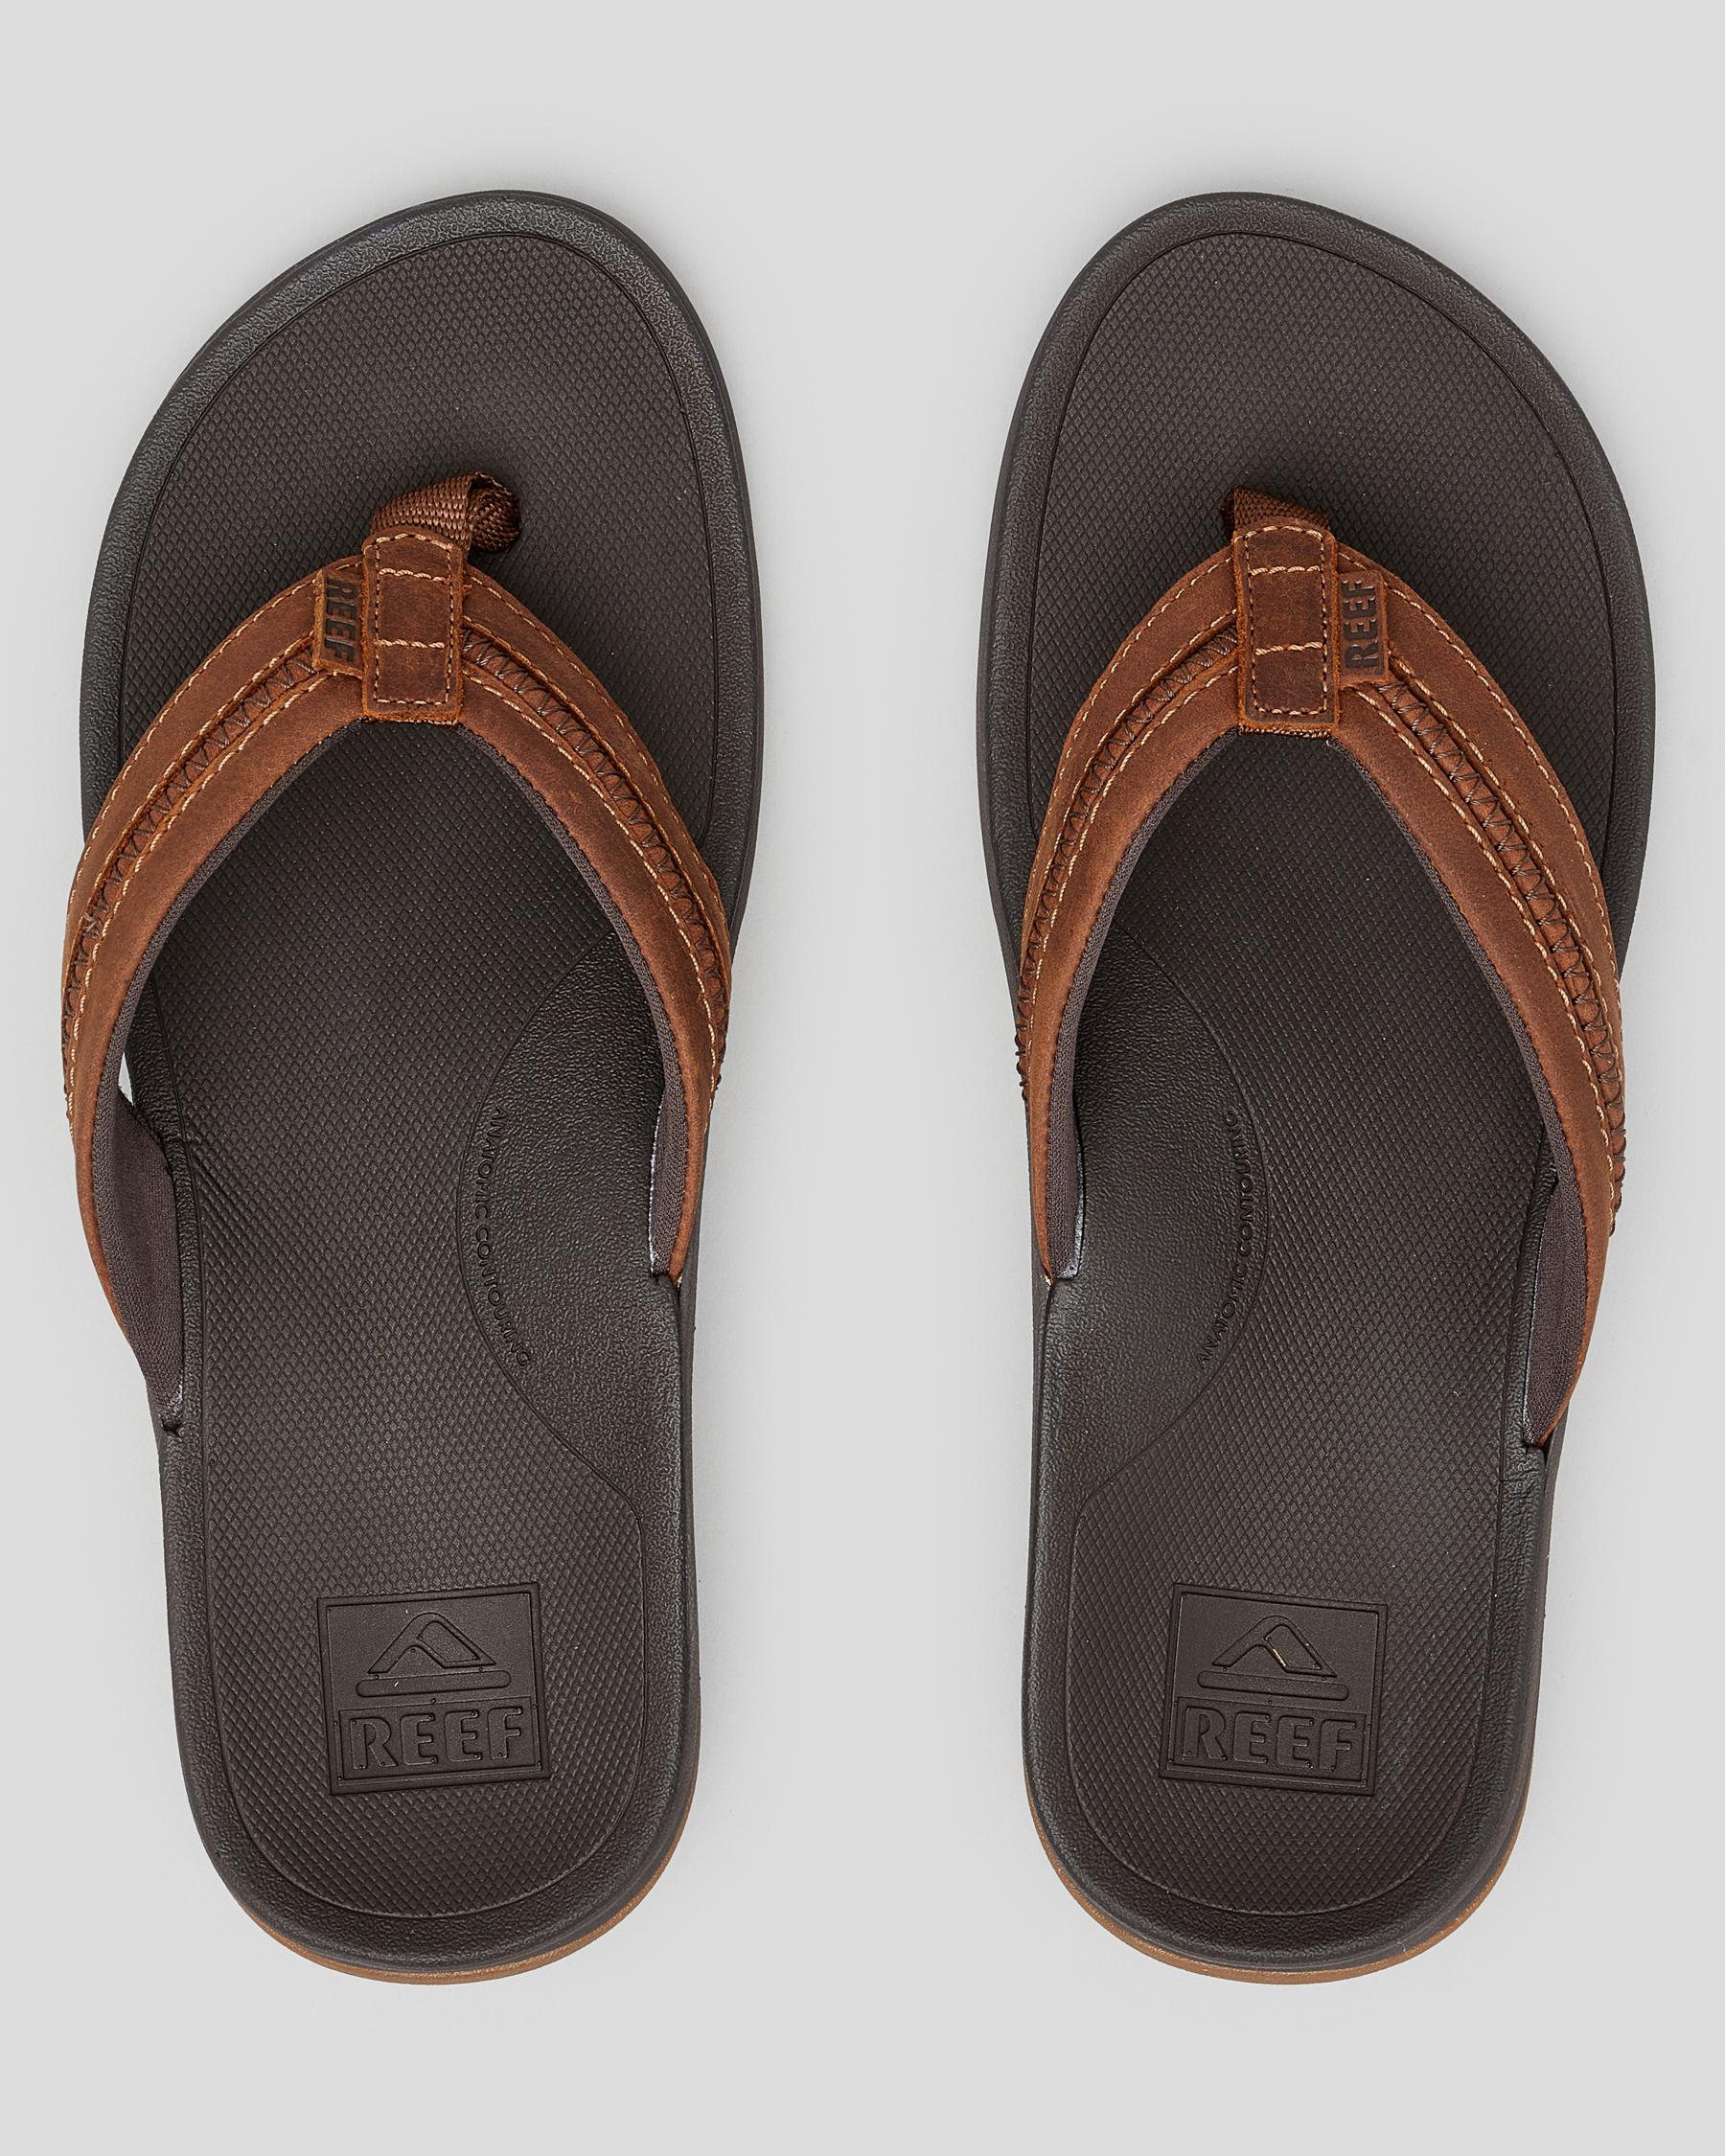 Reef Leather Ortho Coast Thongs In Dark Brown - Fast Shipping & Easy ...